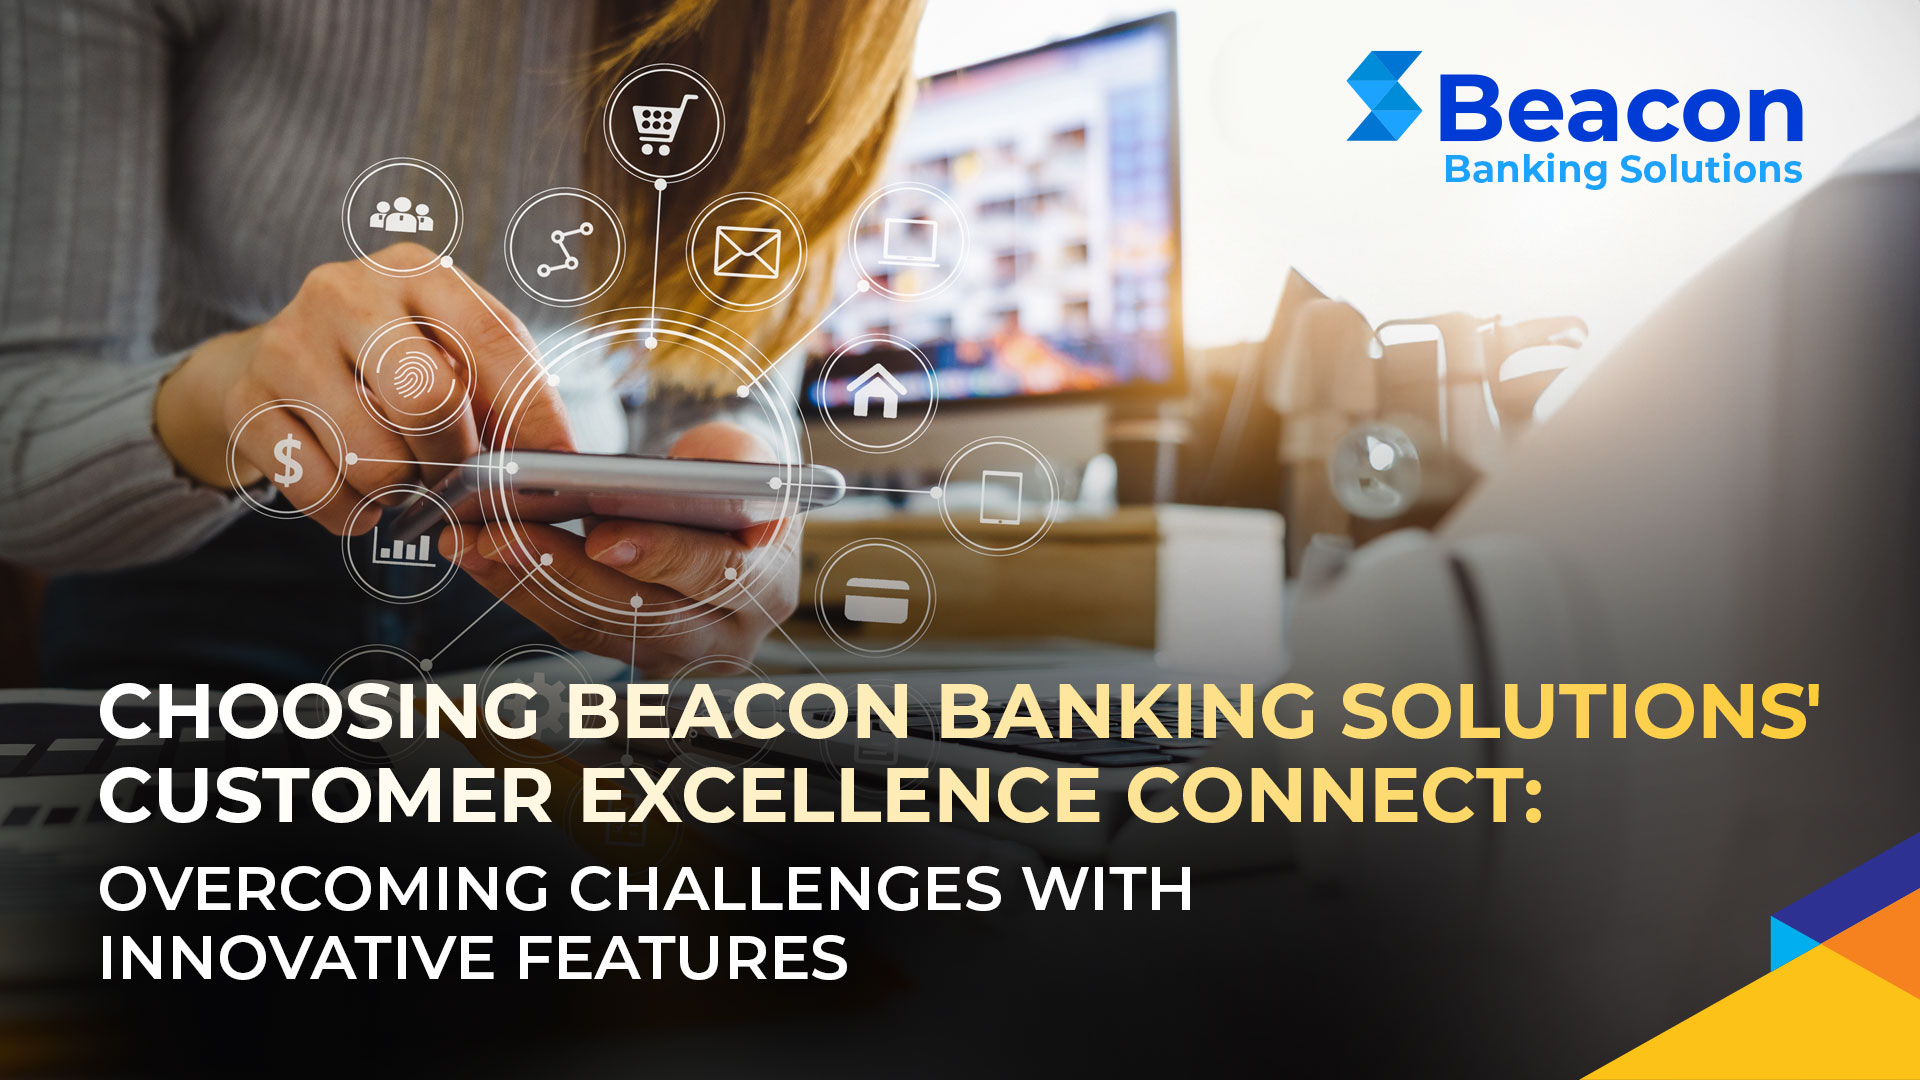 Beacon Banking Solutions